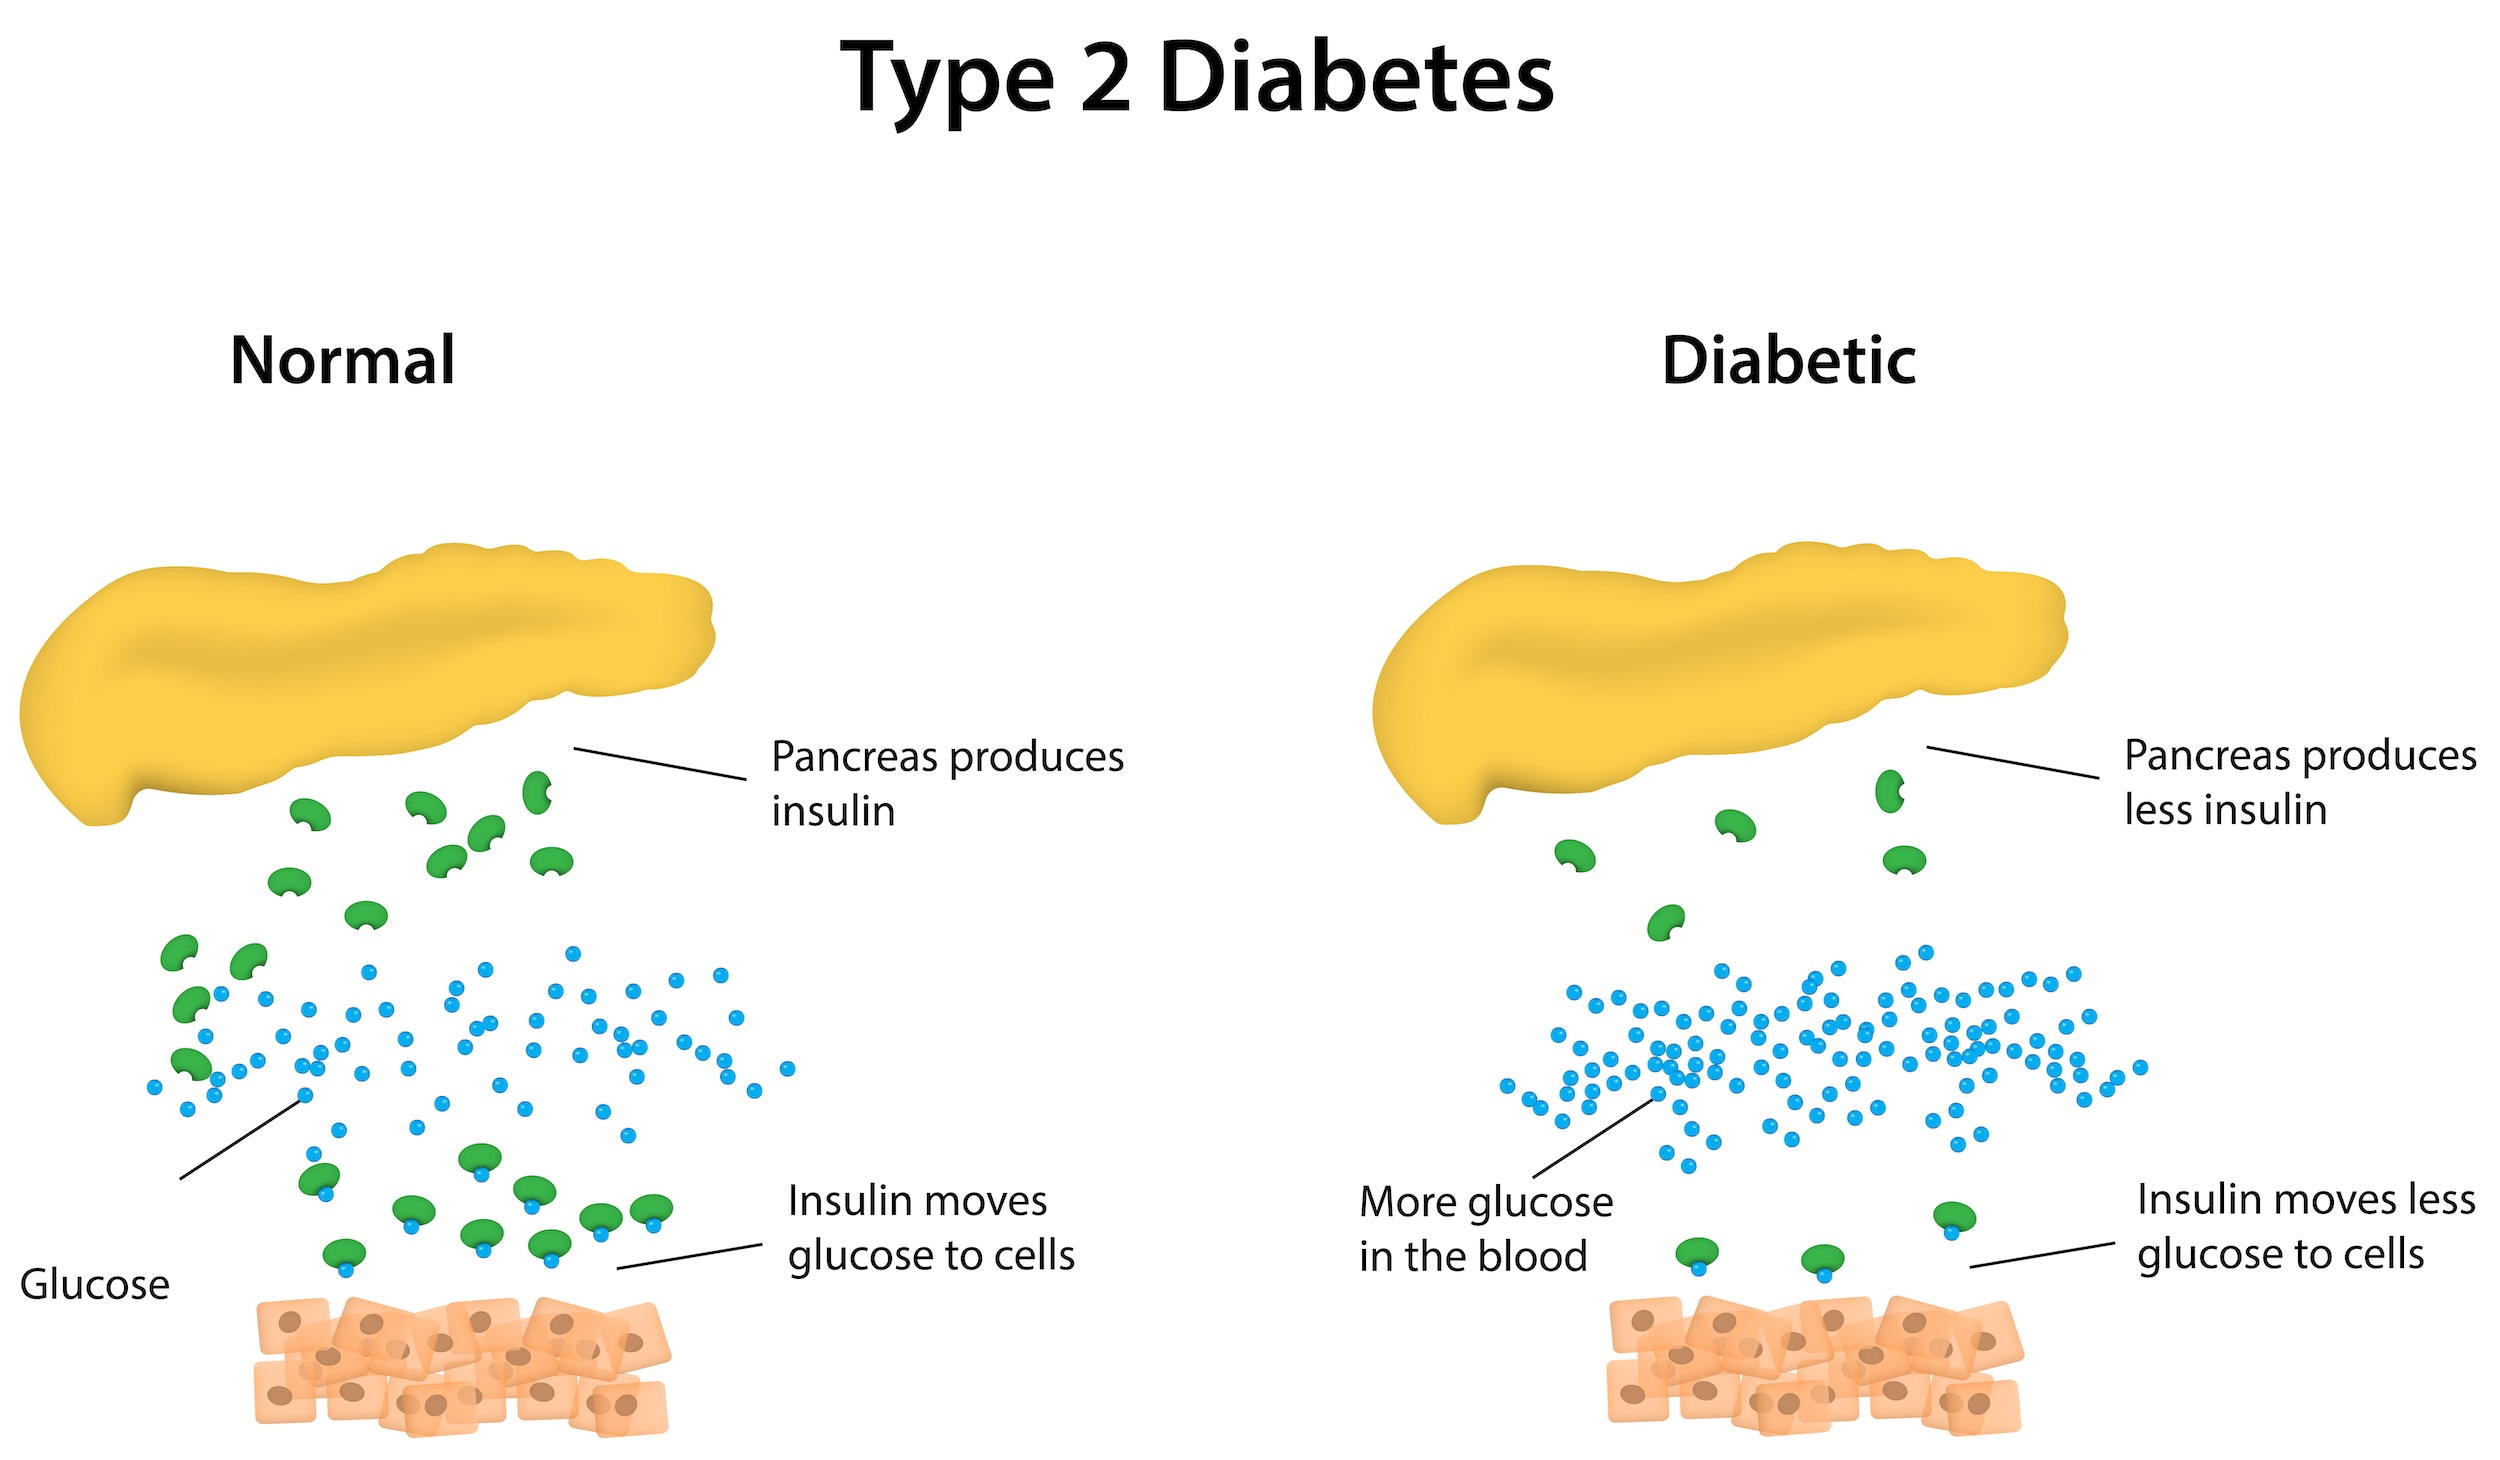 in_type_2_diabetes__the_pancreas_produces_less_insulin_which_results_in_less_glucose_moving_from_the_blood_stream_into_the_c.jpg